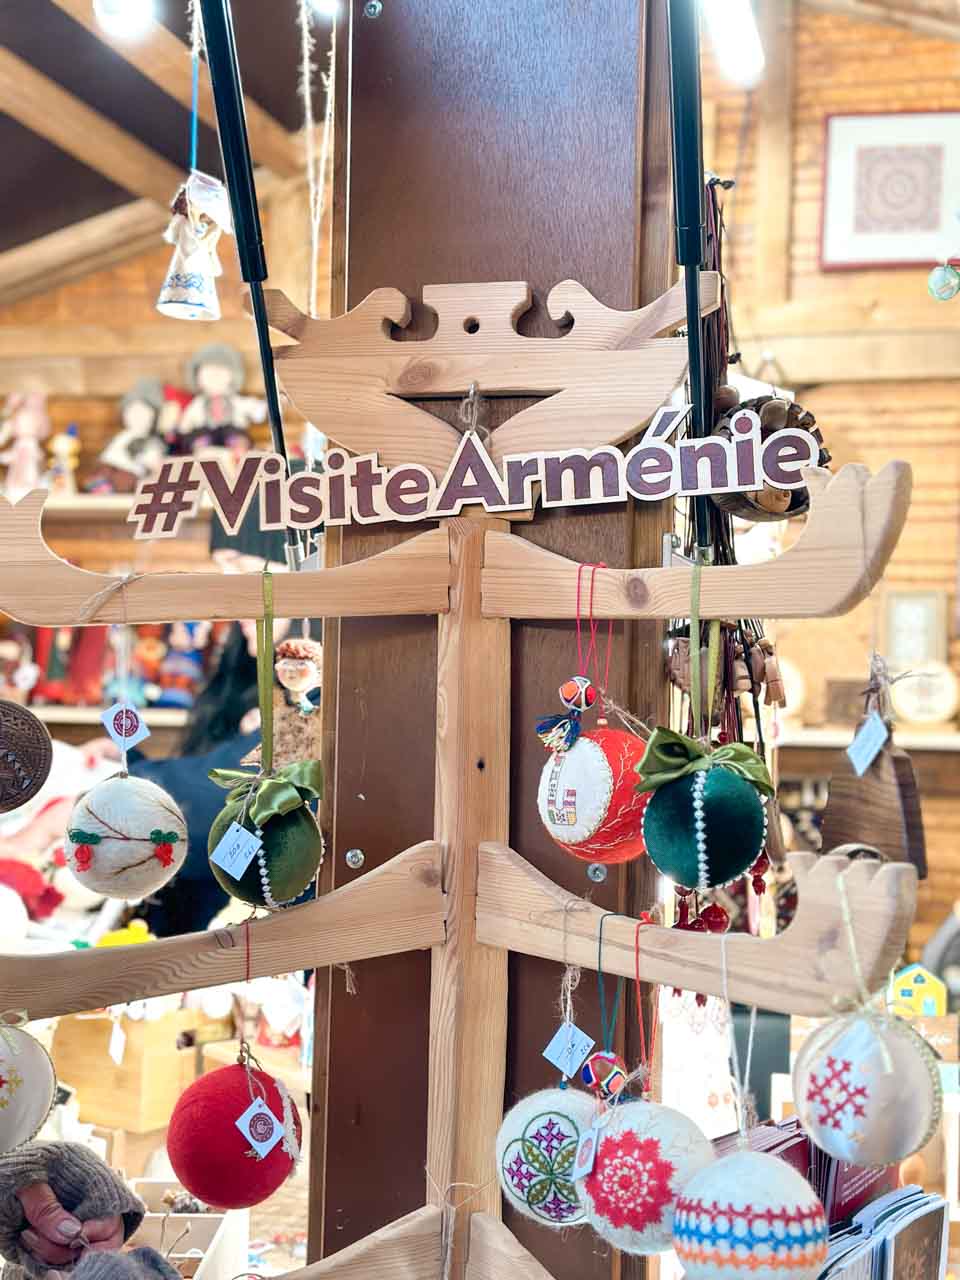 A wooden sign reading '#VisiteArmenie' pointing towards an array of handcrafted Armenian ornaments at a Christmas market stall in Strasbourg